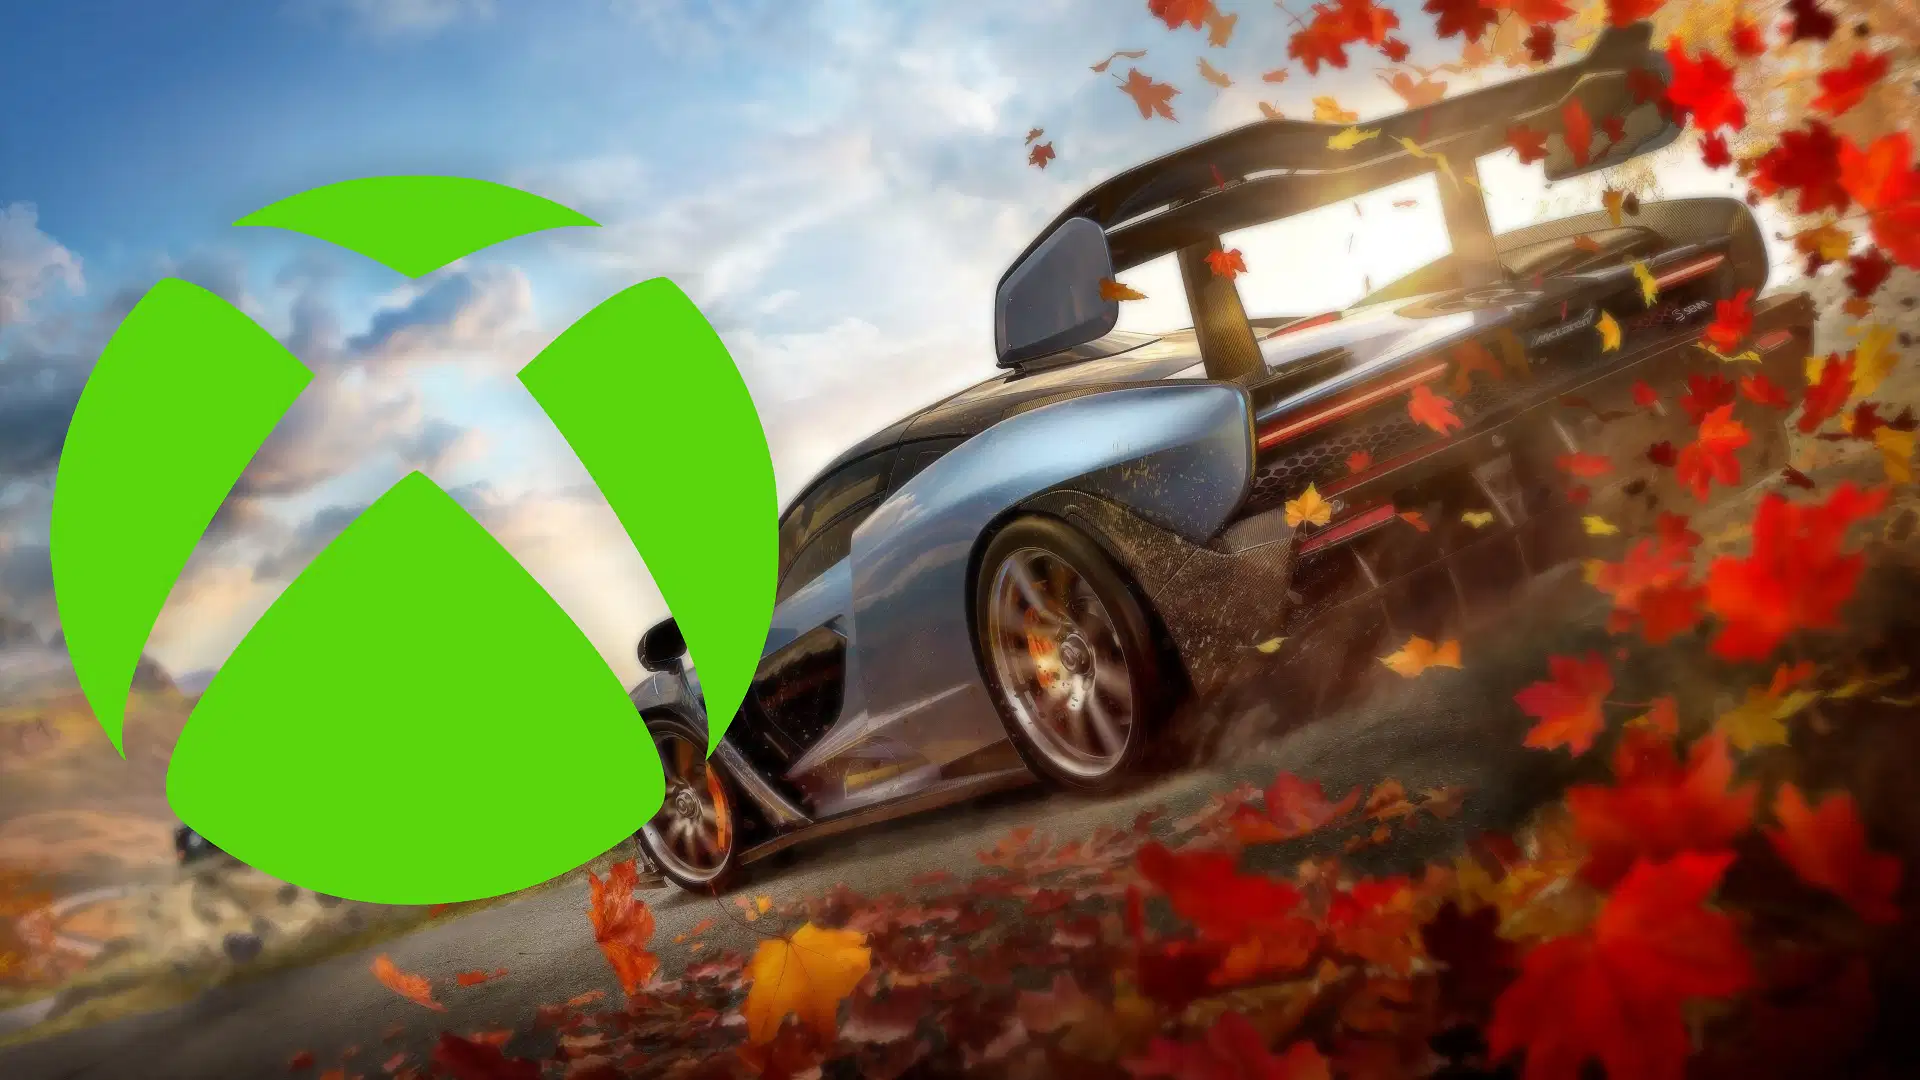 Xbox Chief Reveals, That Physical Game Disks Will Stay, No Plans To Go for Fully Digital